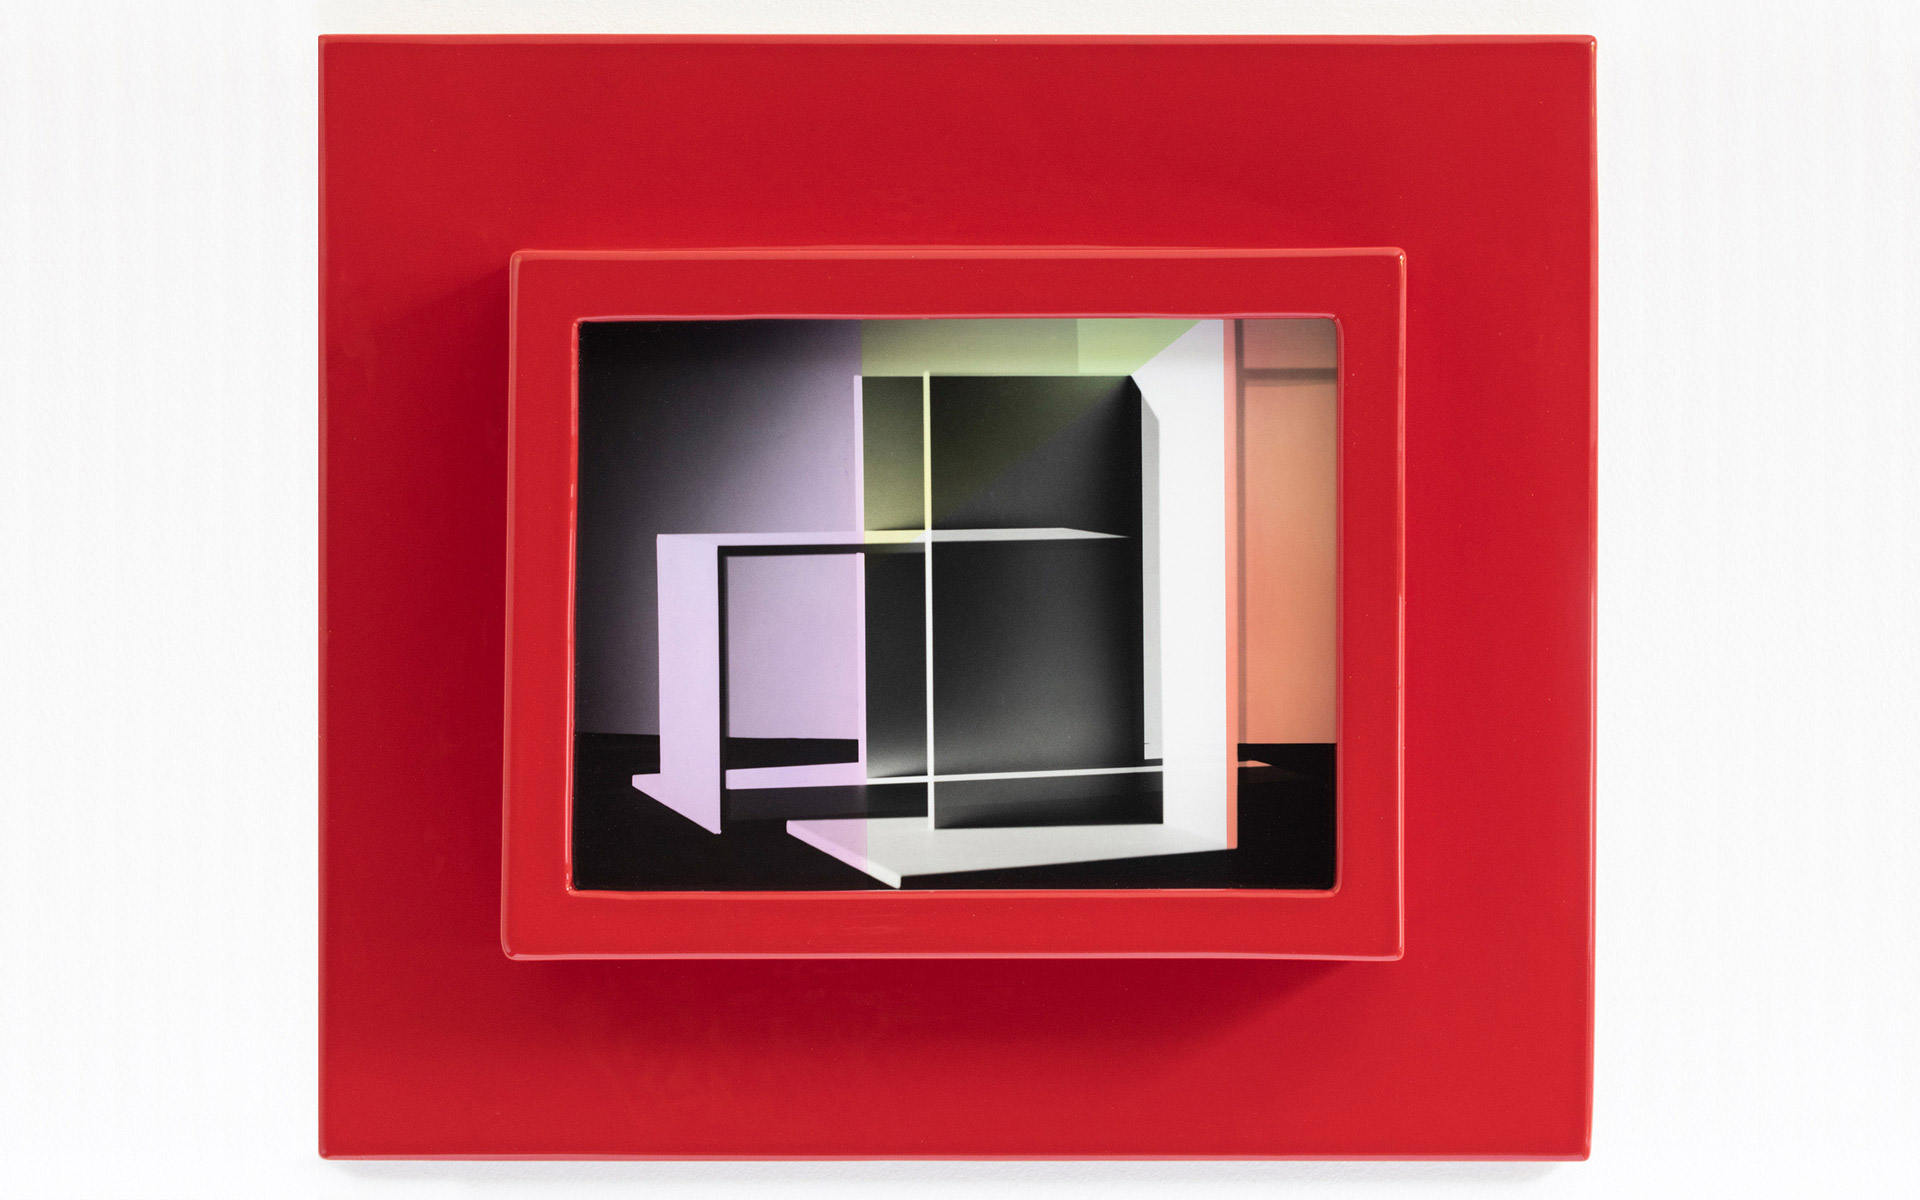 Displacement_10, 2023. Hand-colored silver gelatine print on baryta paper on aluminium, in handmade ceramic frame .